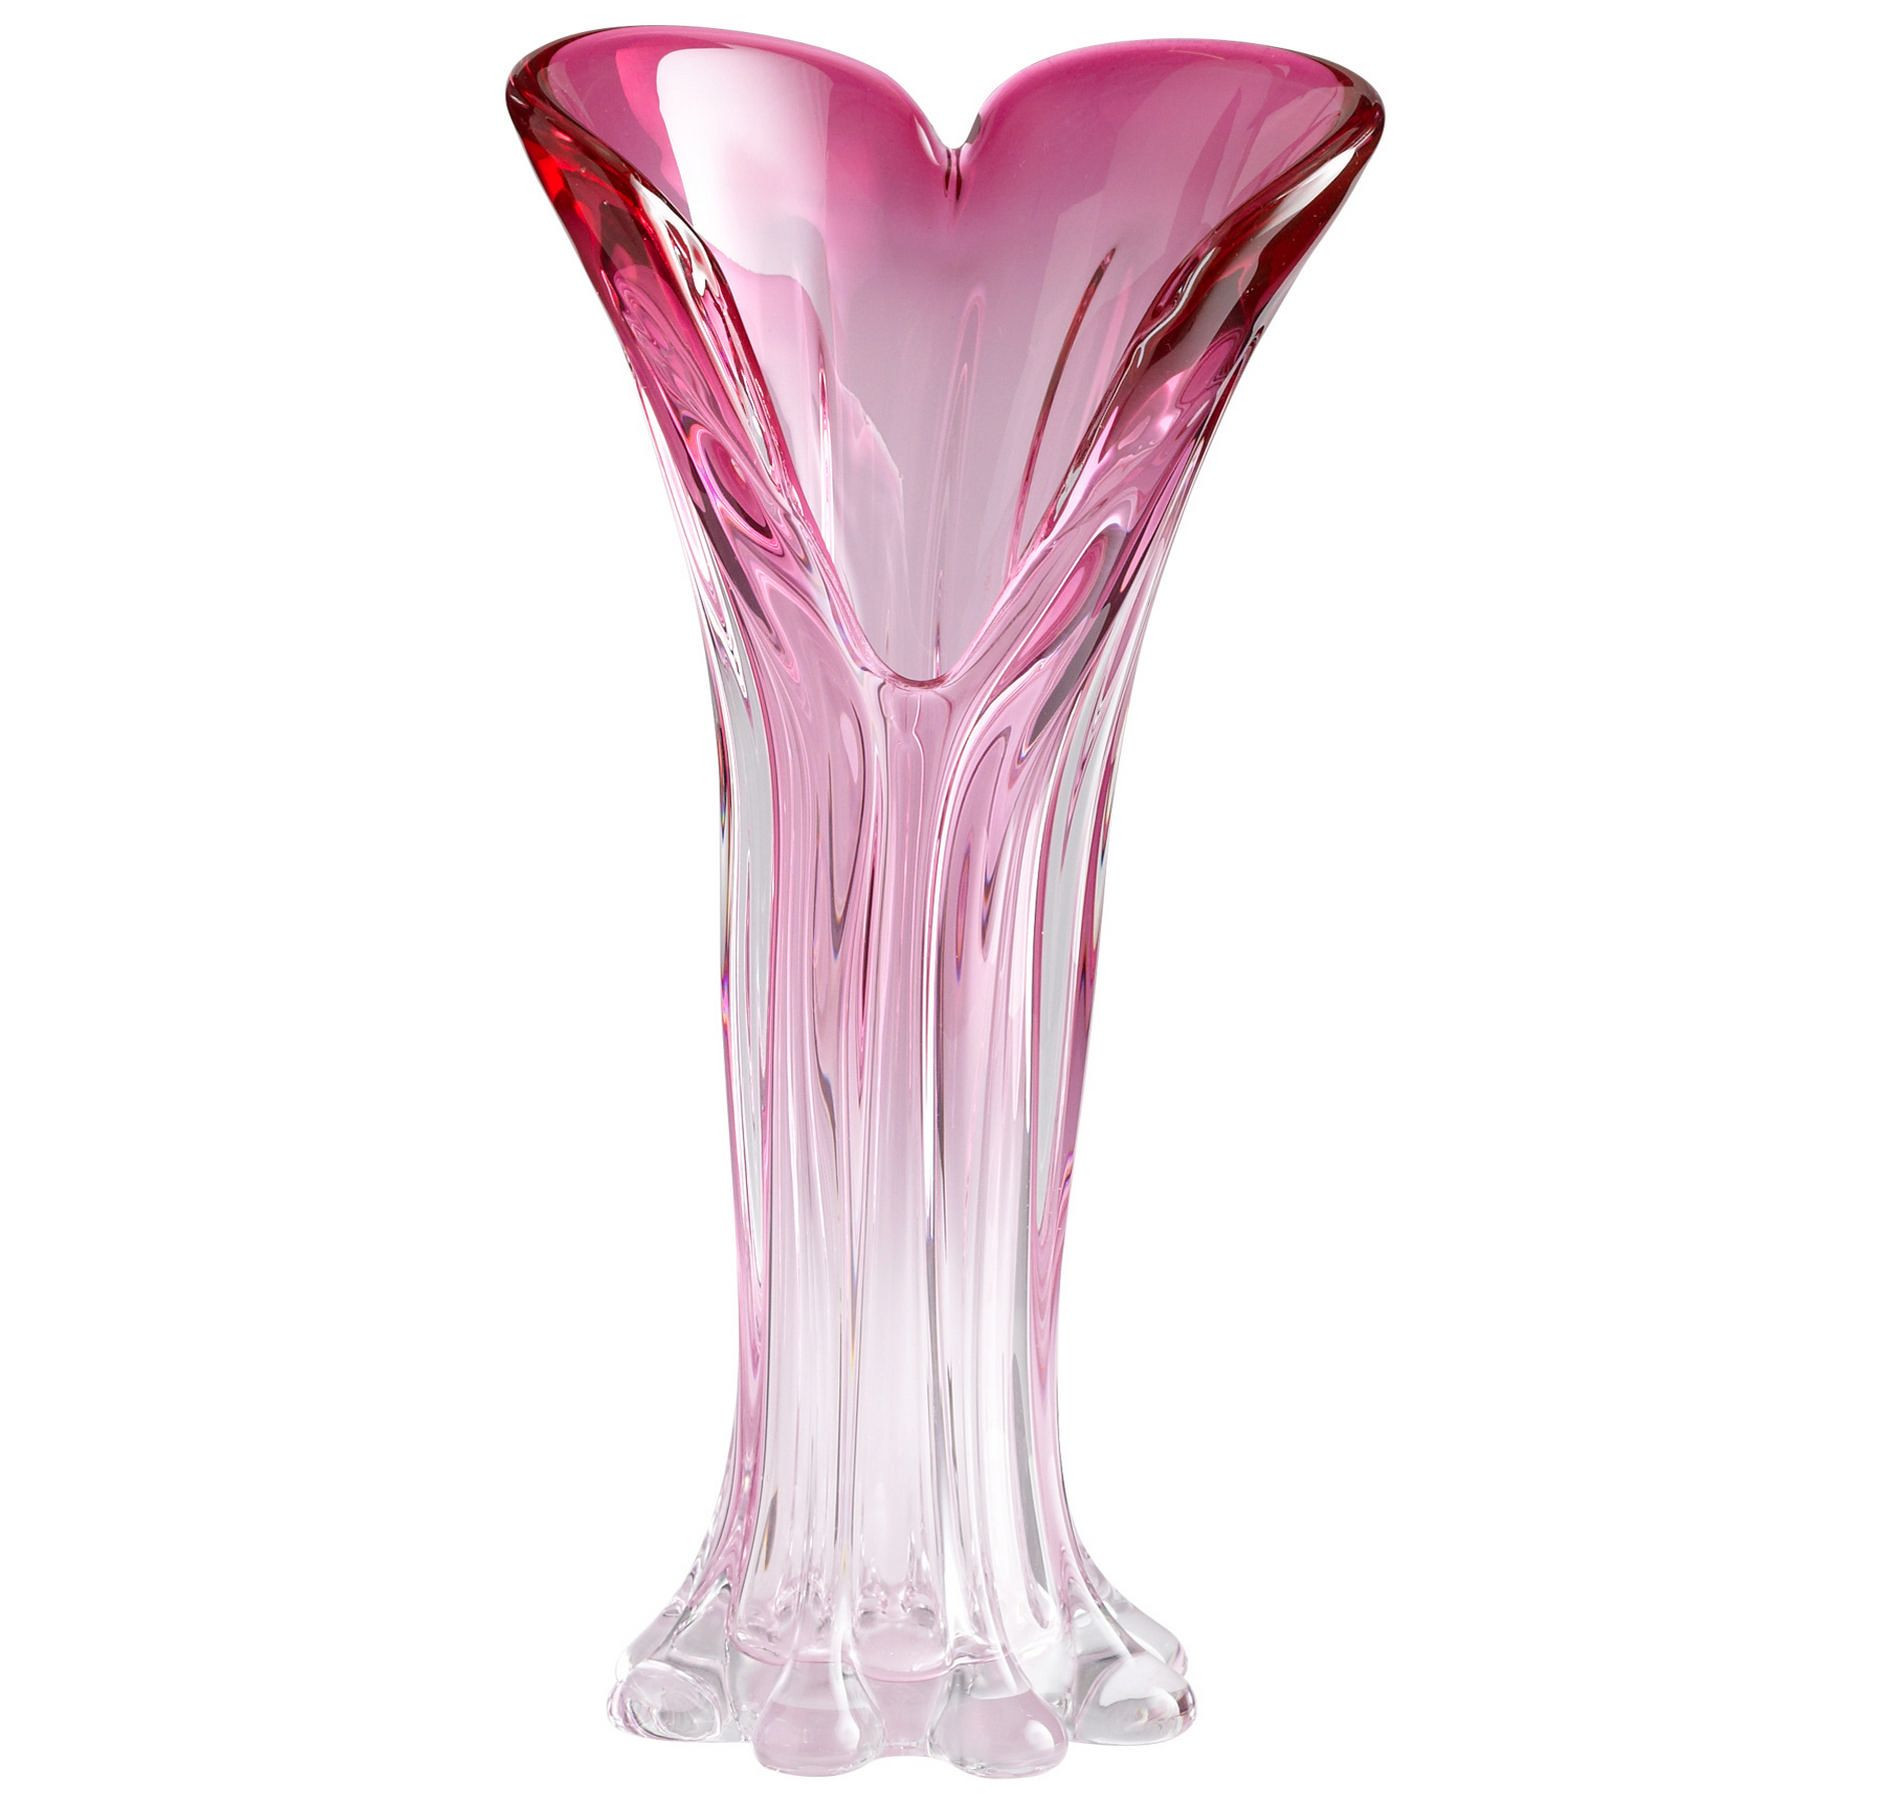 15 Elegant Tall Glass Decorative Vases 2024 free download tall glass decorative vases of cyan design 05388 large cuore vase in pink finish in home decor throughout cyan design 05388 large cuore vase in pink finish in home decor vases urns